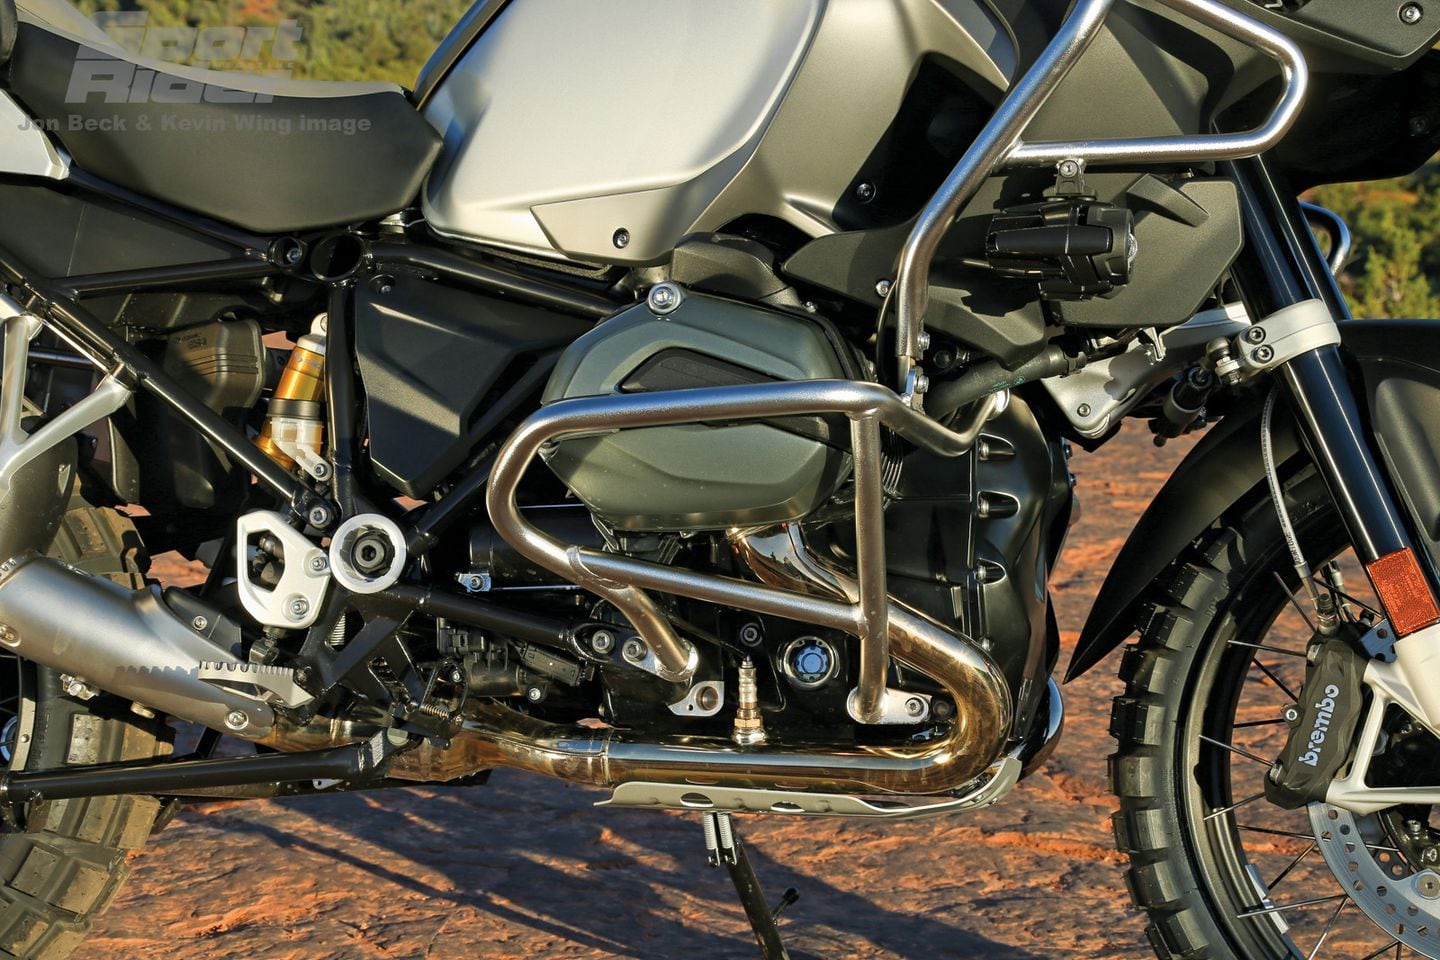 2014 BMW R 1200 GS Adventure Review | Cycle World